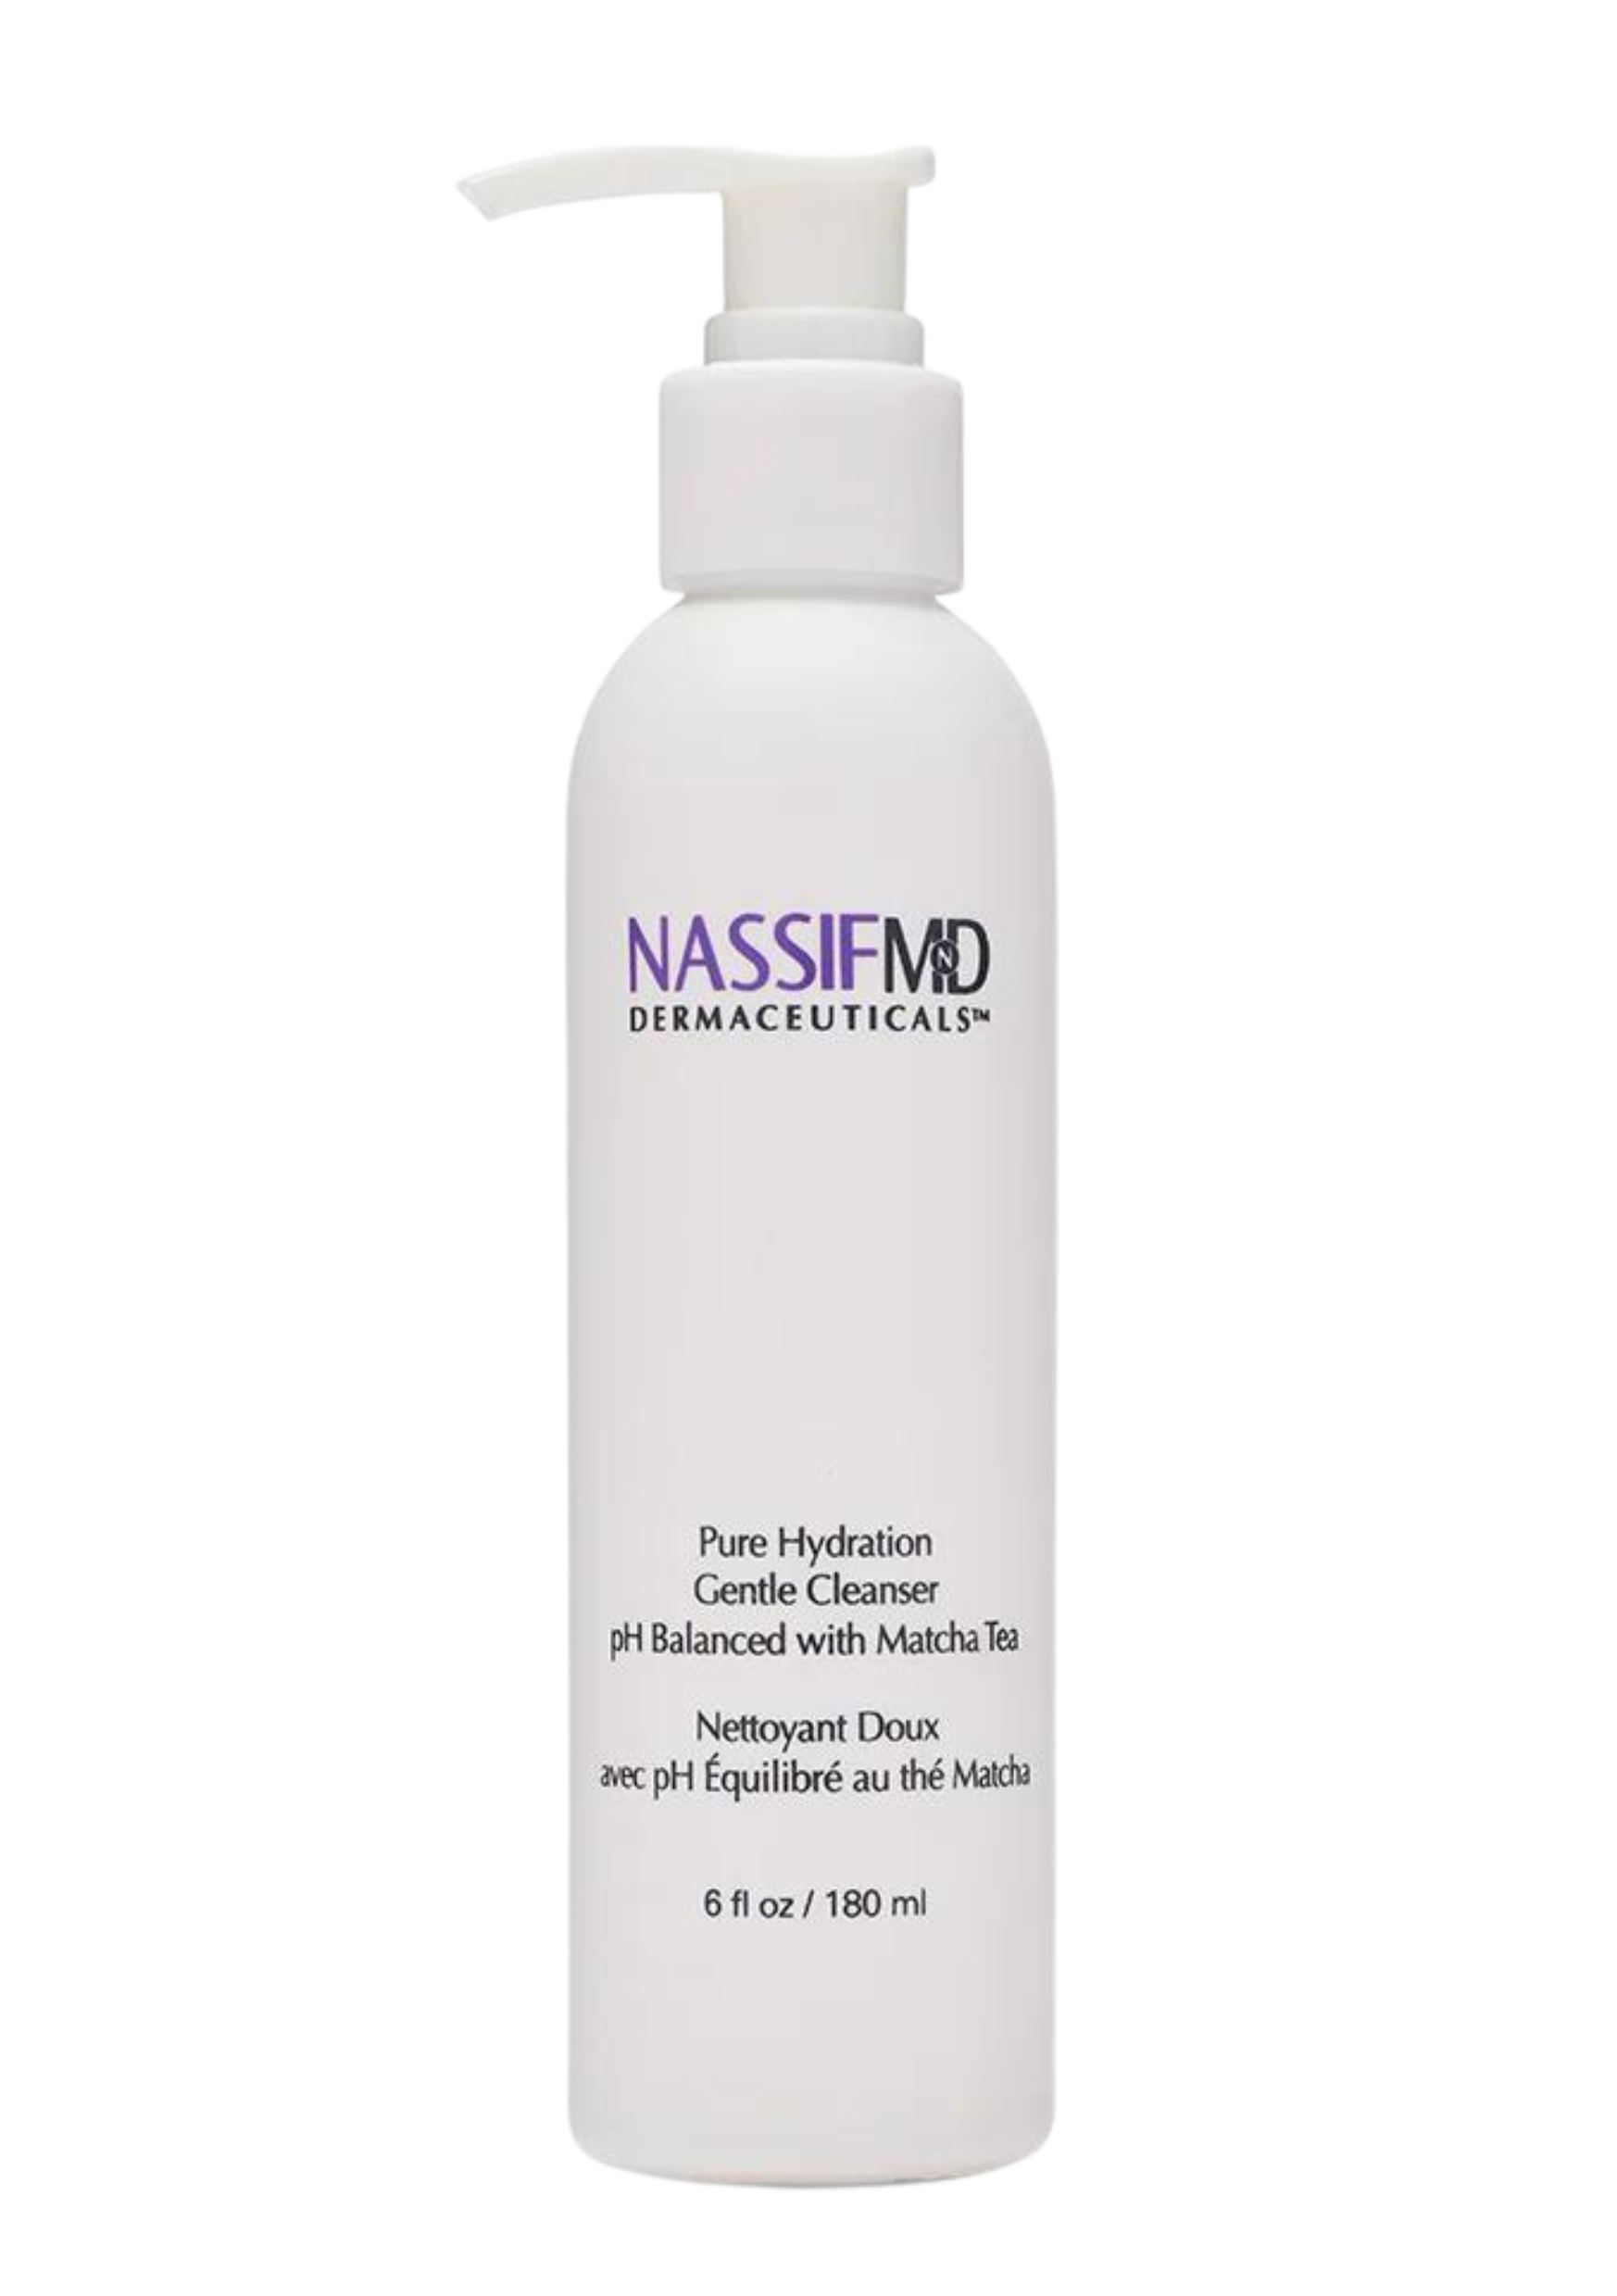 Nassif MD® Pure Hydration Gentle Cleanser